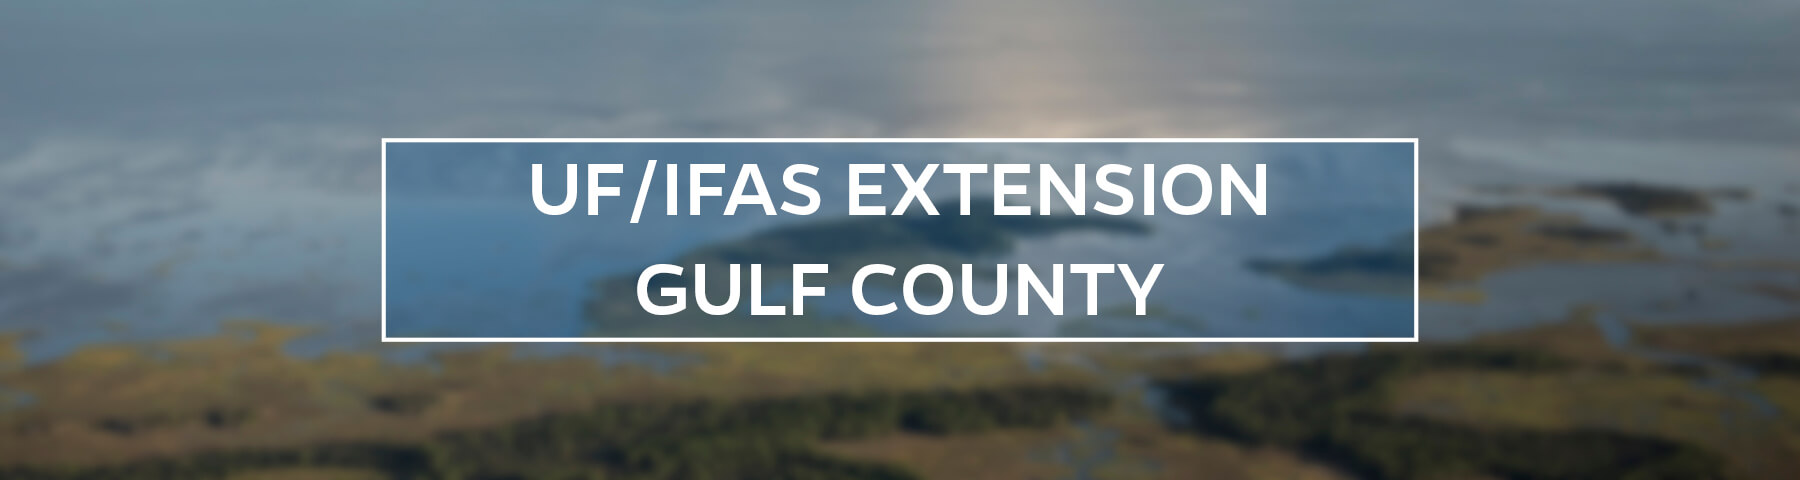 UF/IFAS Extension Gulf County